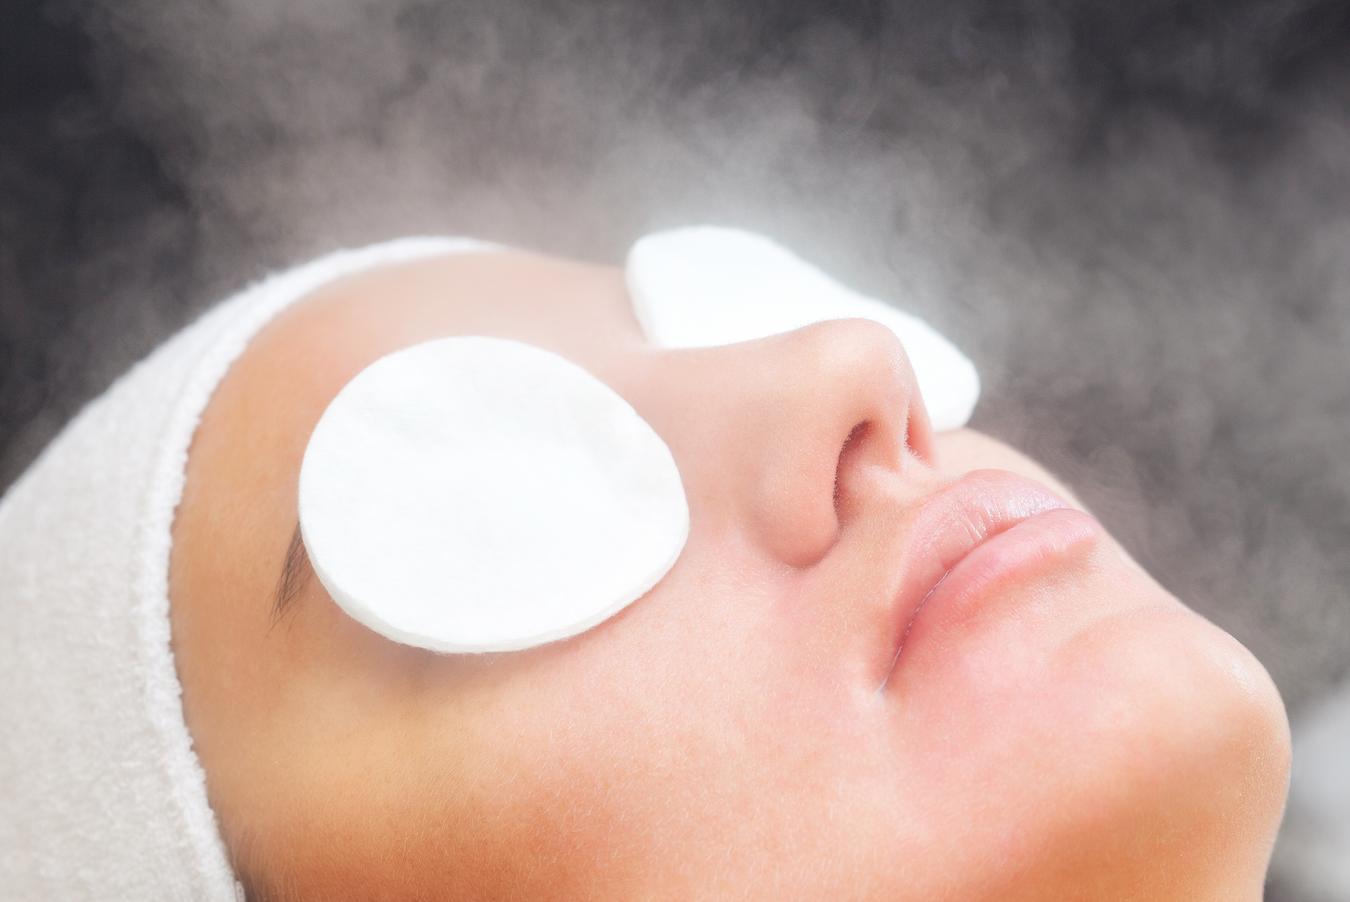 Getting a facial steamer at home gives you access to facials whenever you want or need them